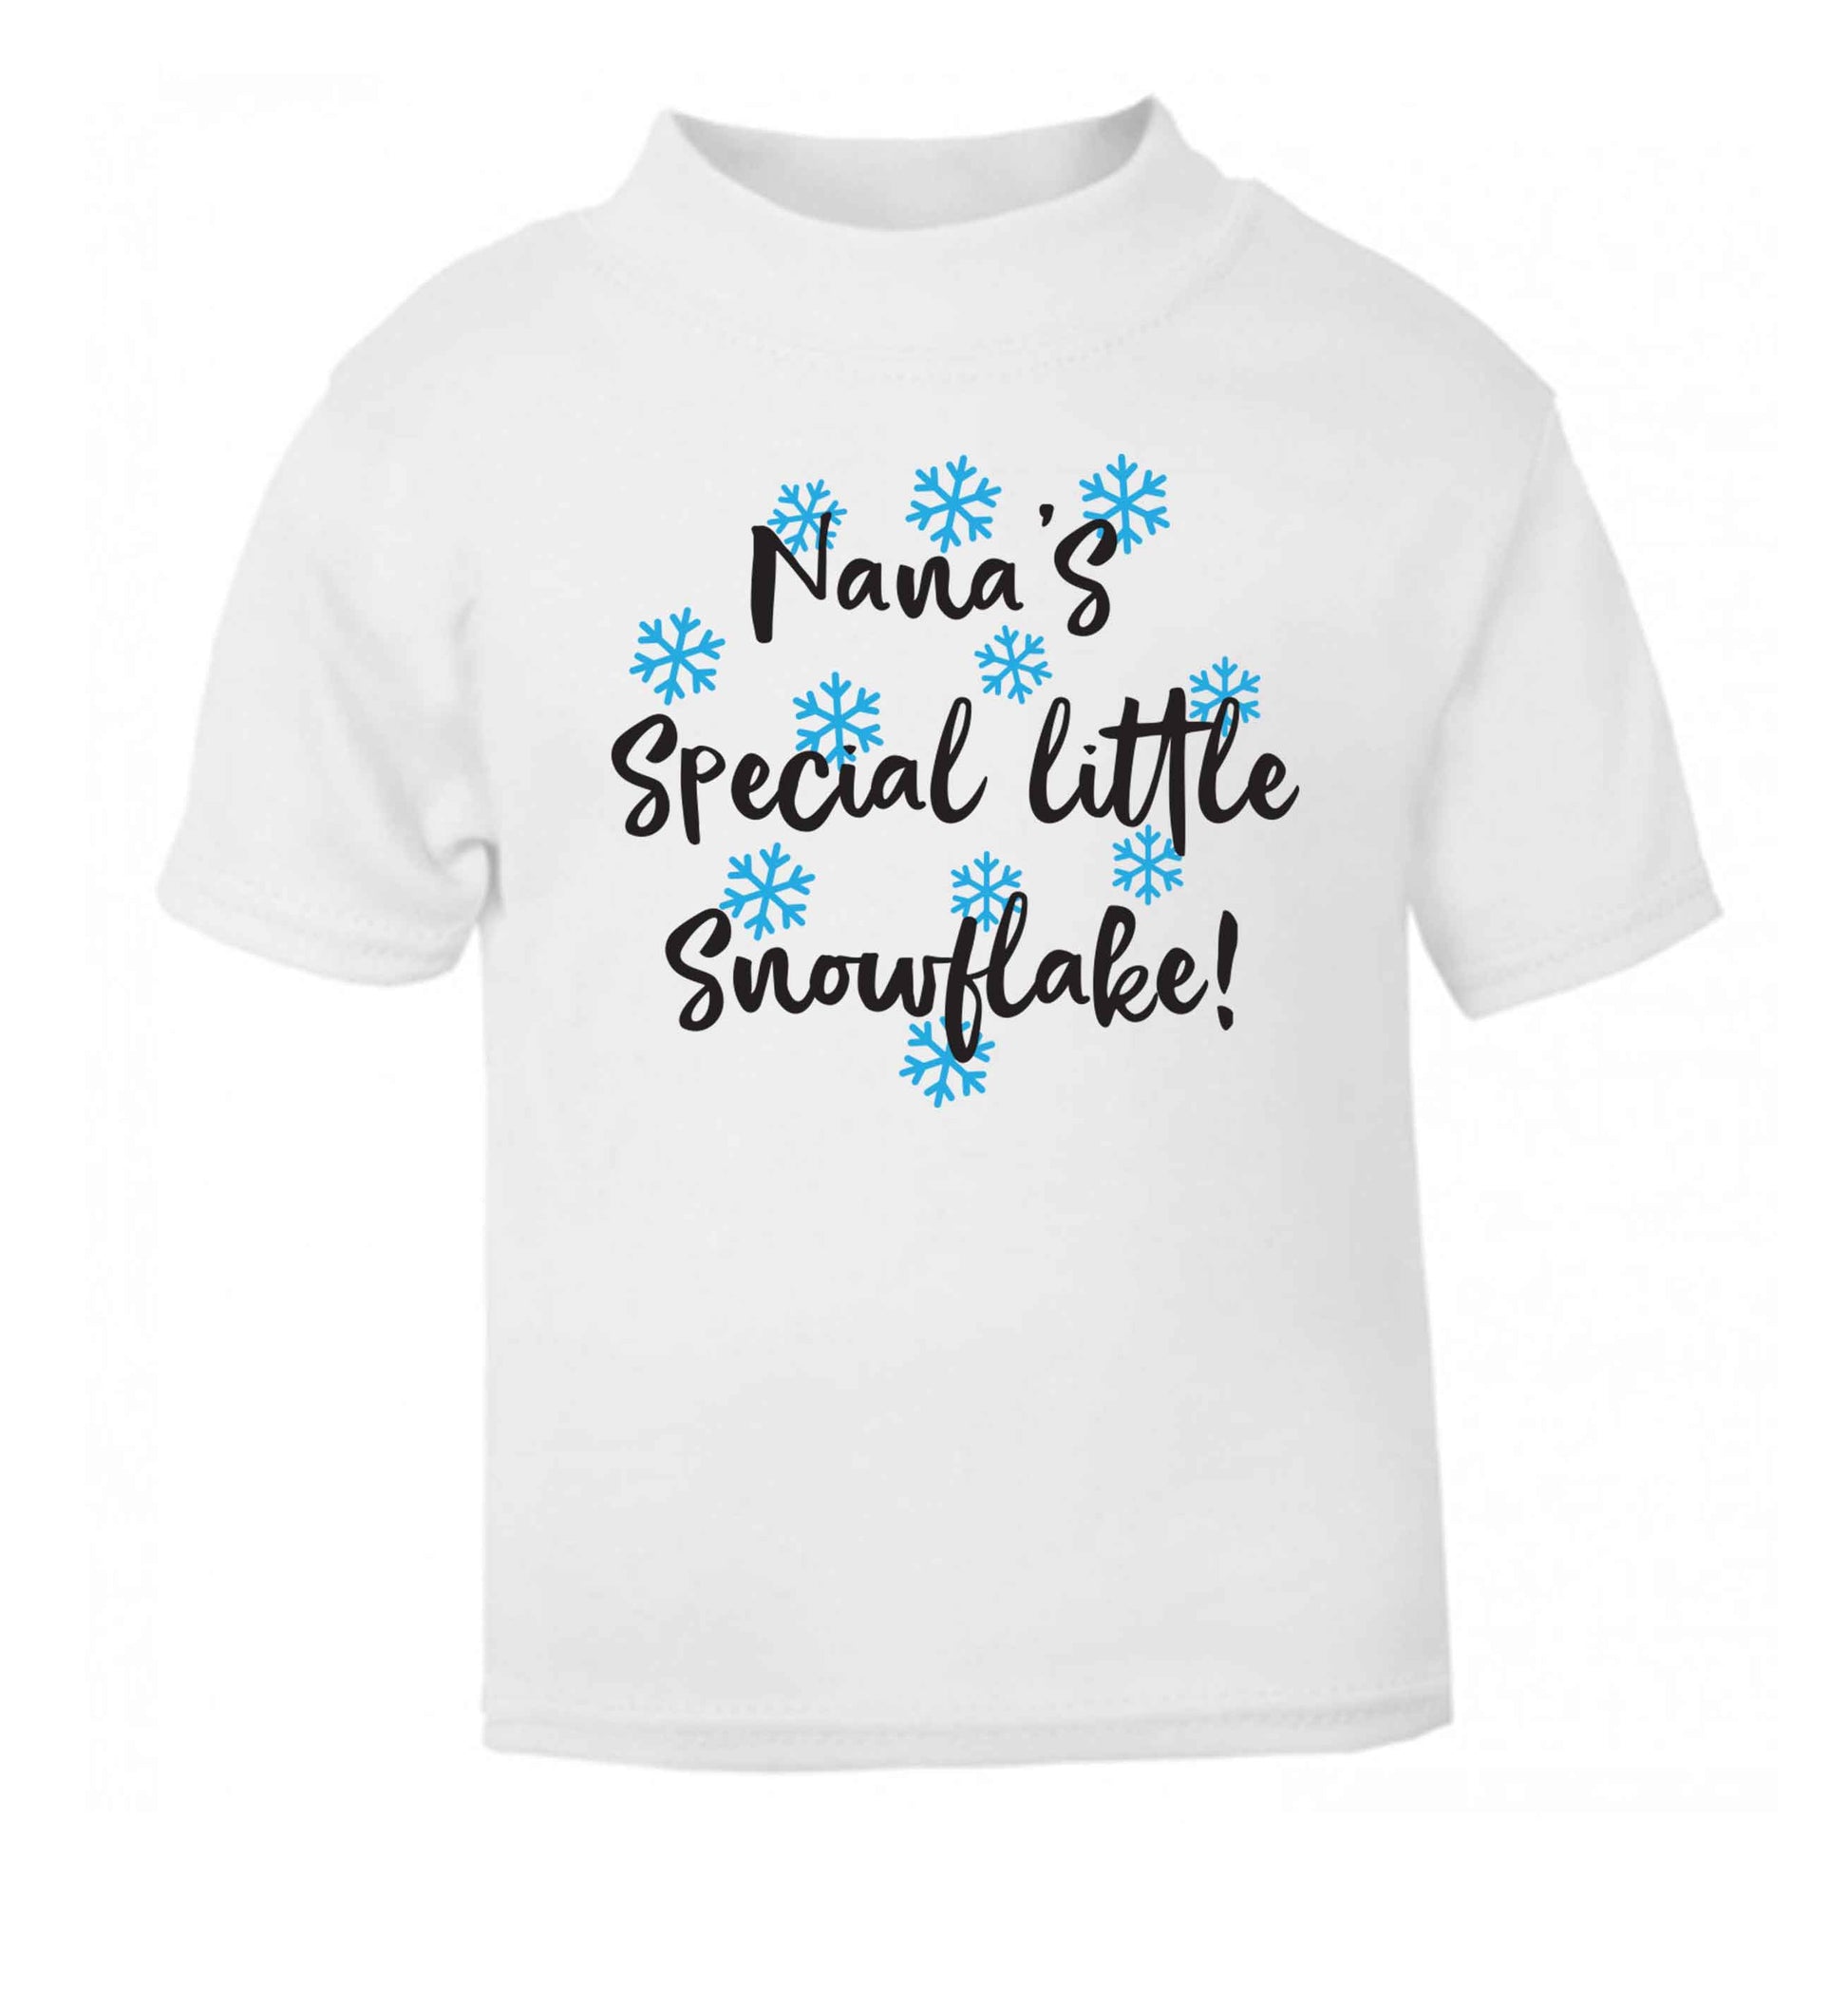 Nana's special little snowflake white Baby Toddler Tshirt 2 Years